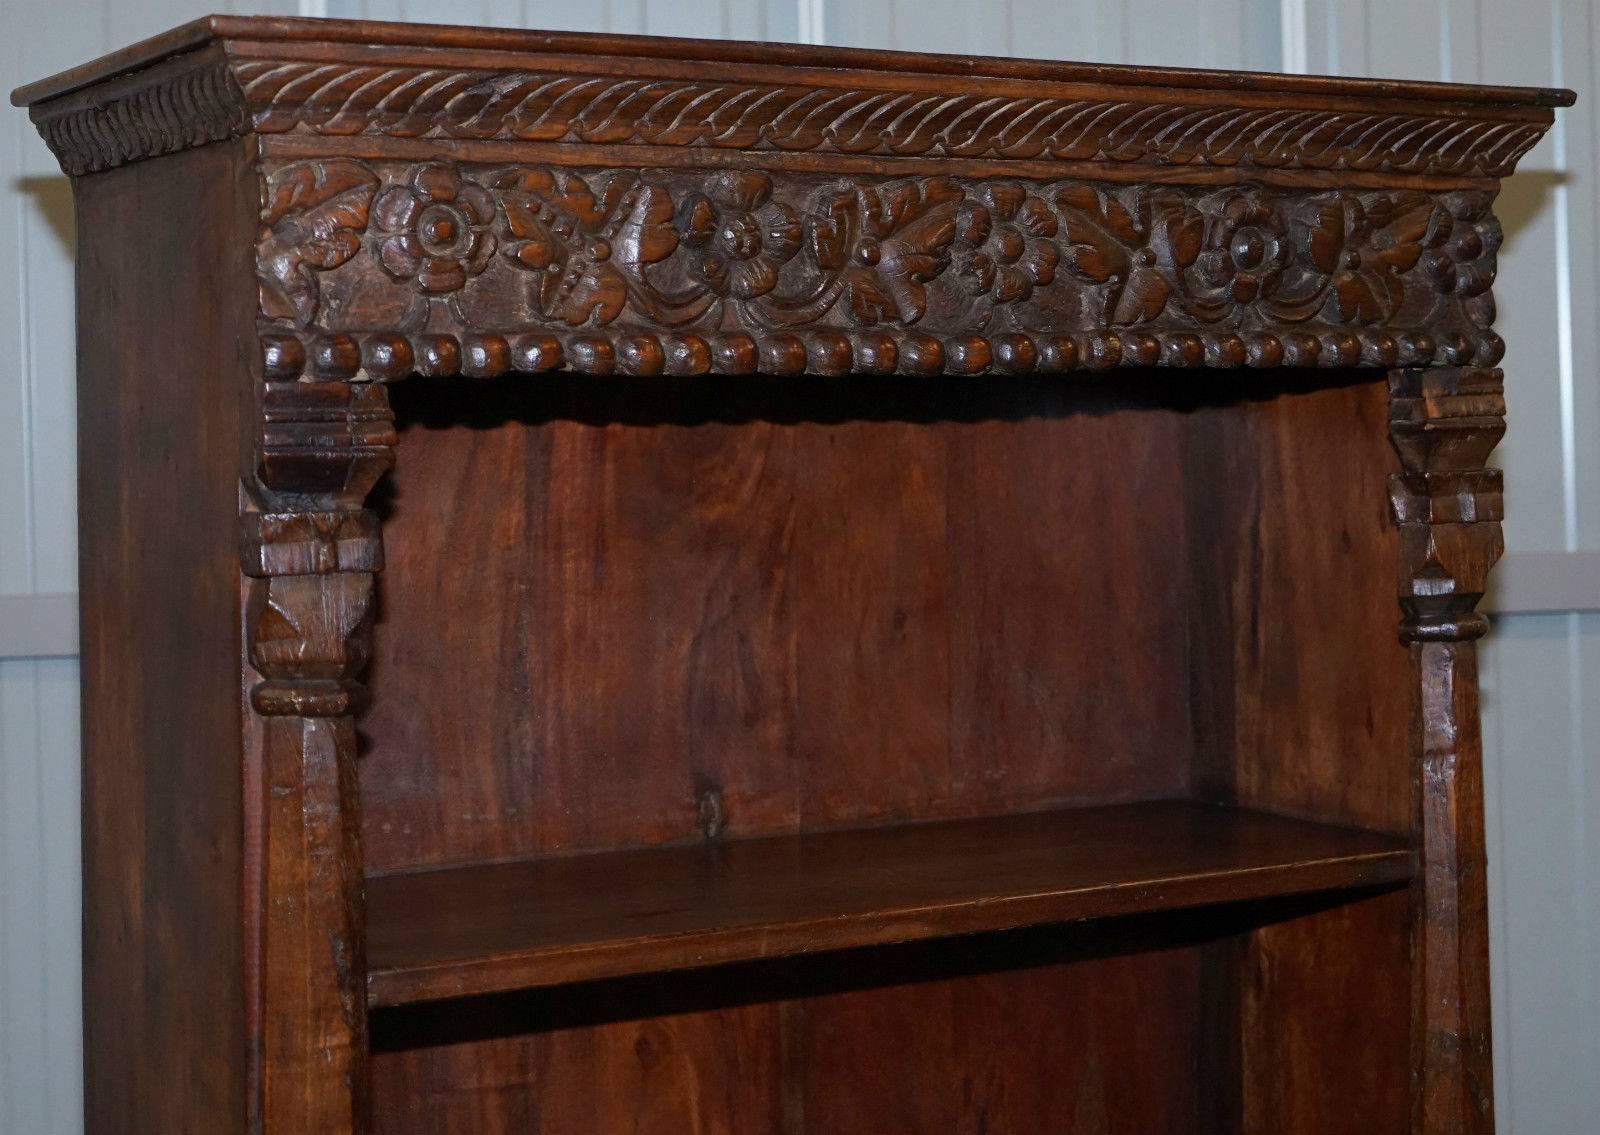 We are delighted to offer for sale this absolutely stunning hand-carved solid teak wood vintage bookcase

An exquisite and well-made thing that is just about as solid as you could possibly hope for

We have lightly cleaned hand waxed and hand